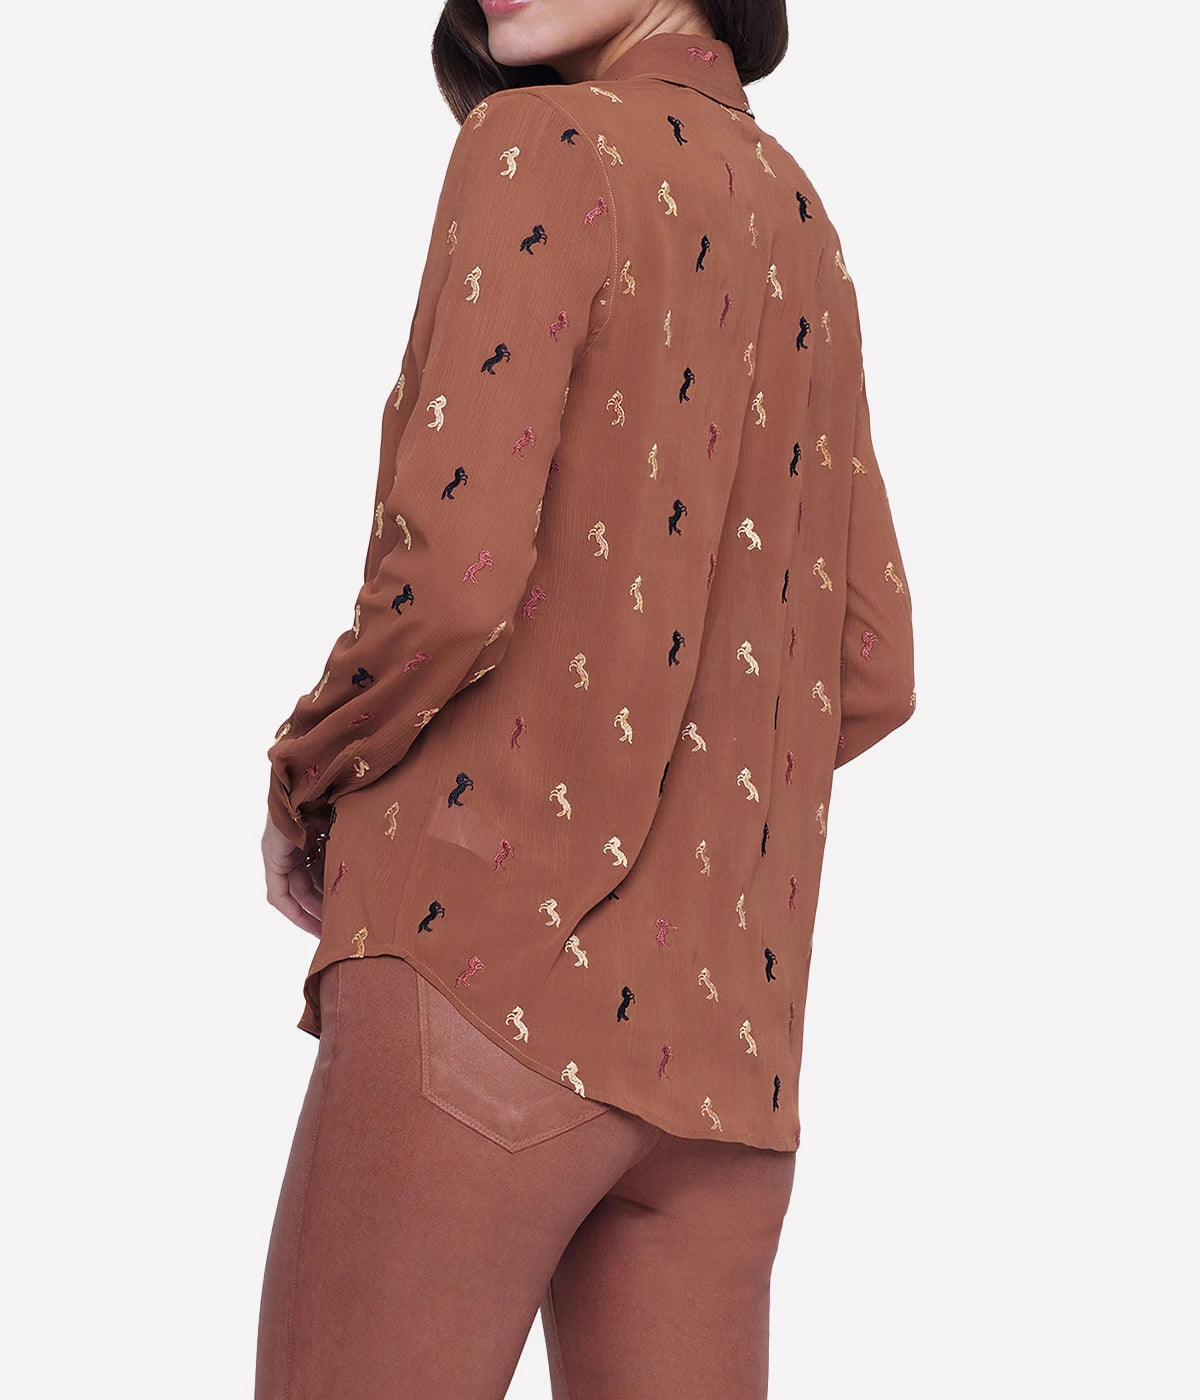 Laurent Shirt in Fawn & Multi Horse